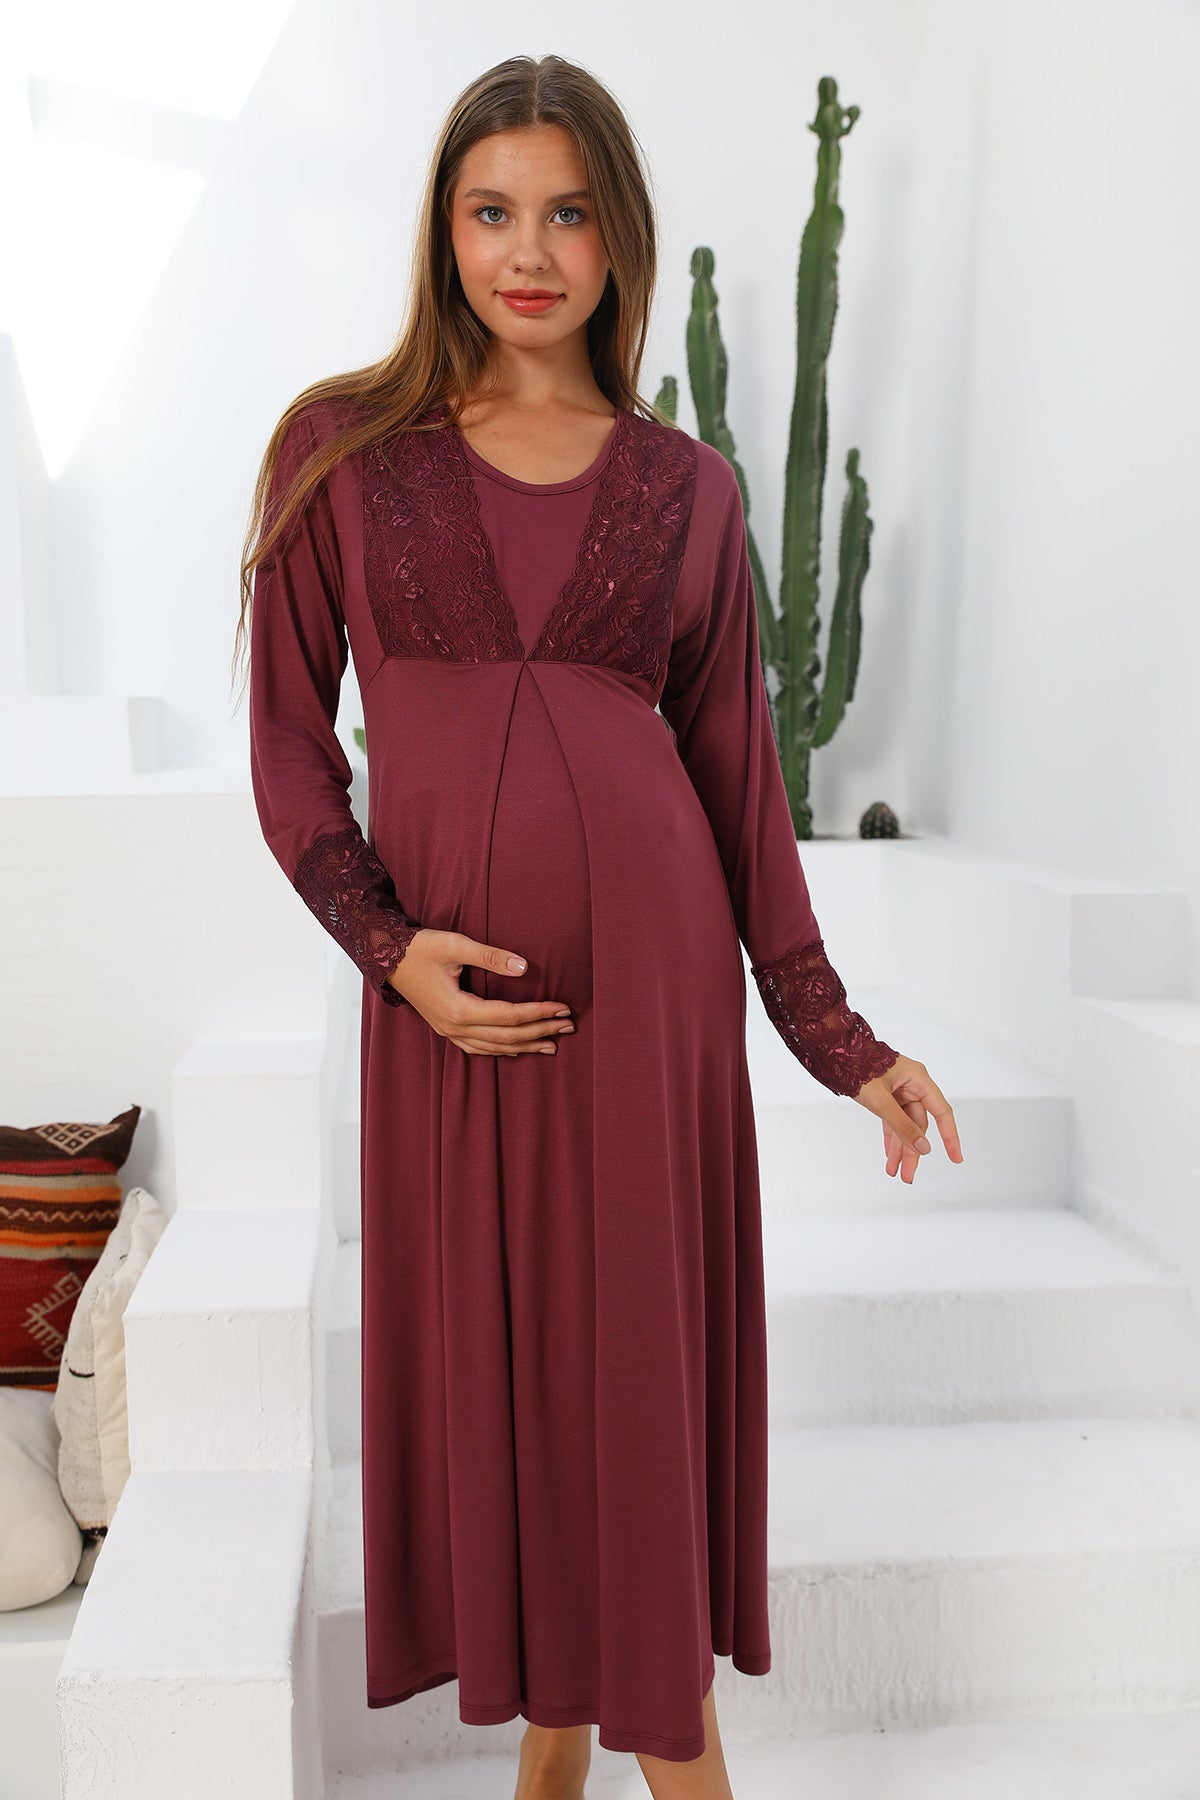 Shopymommy 702102 Silence Welsoft Lace Embroidered 4 Pieces Maternity & Nursing Set Plum